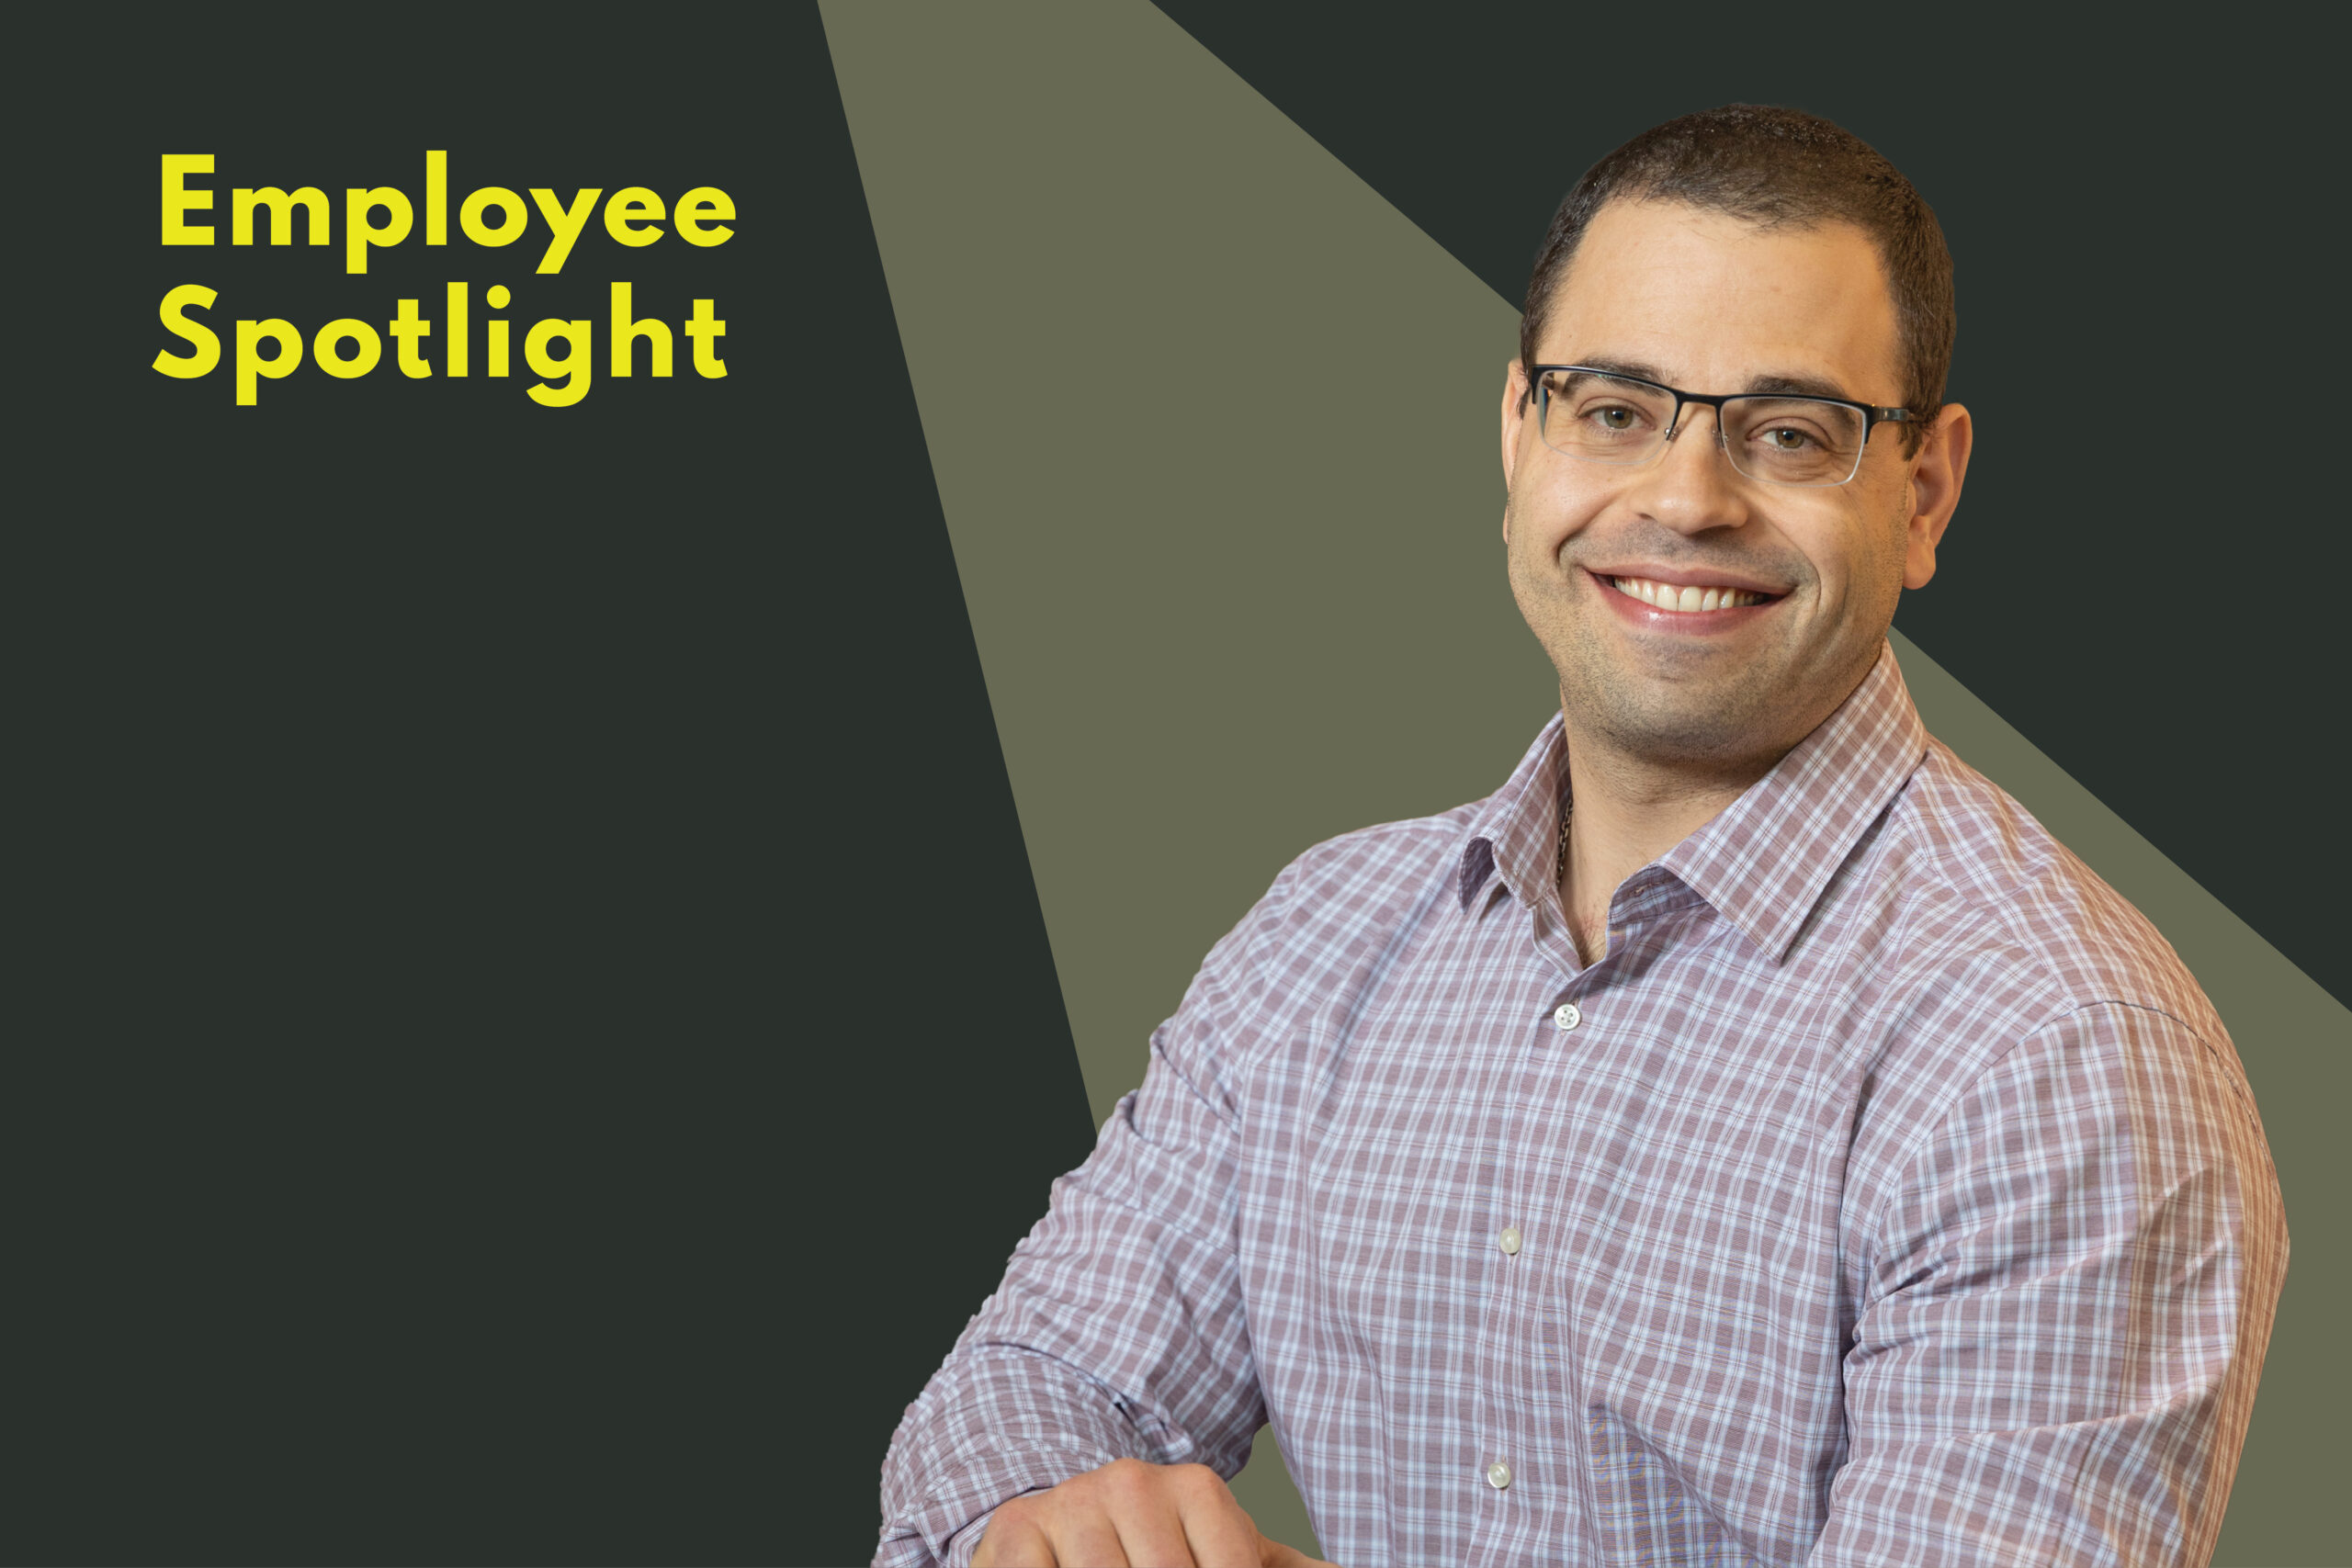 Marc Habre is TOCCI's January Employee Spotlight